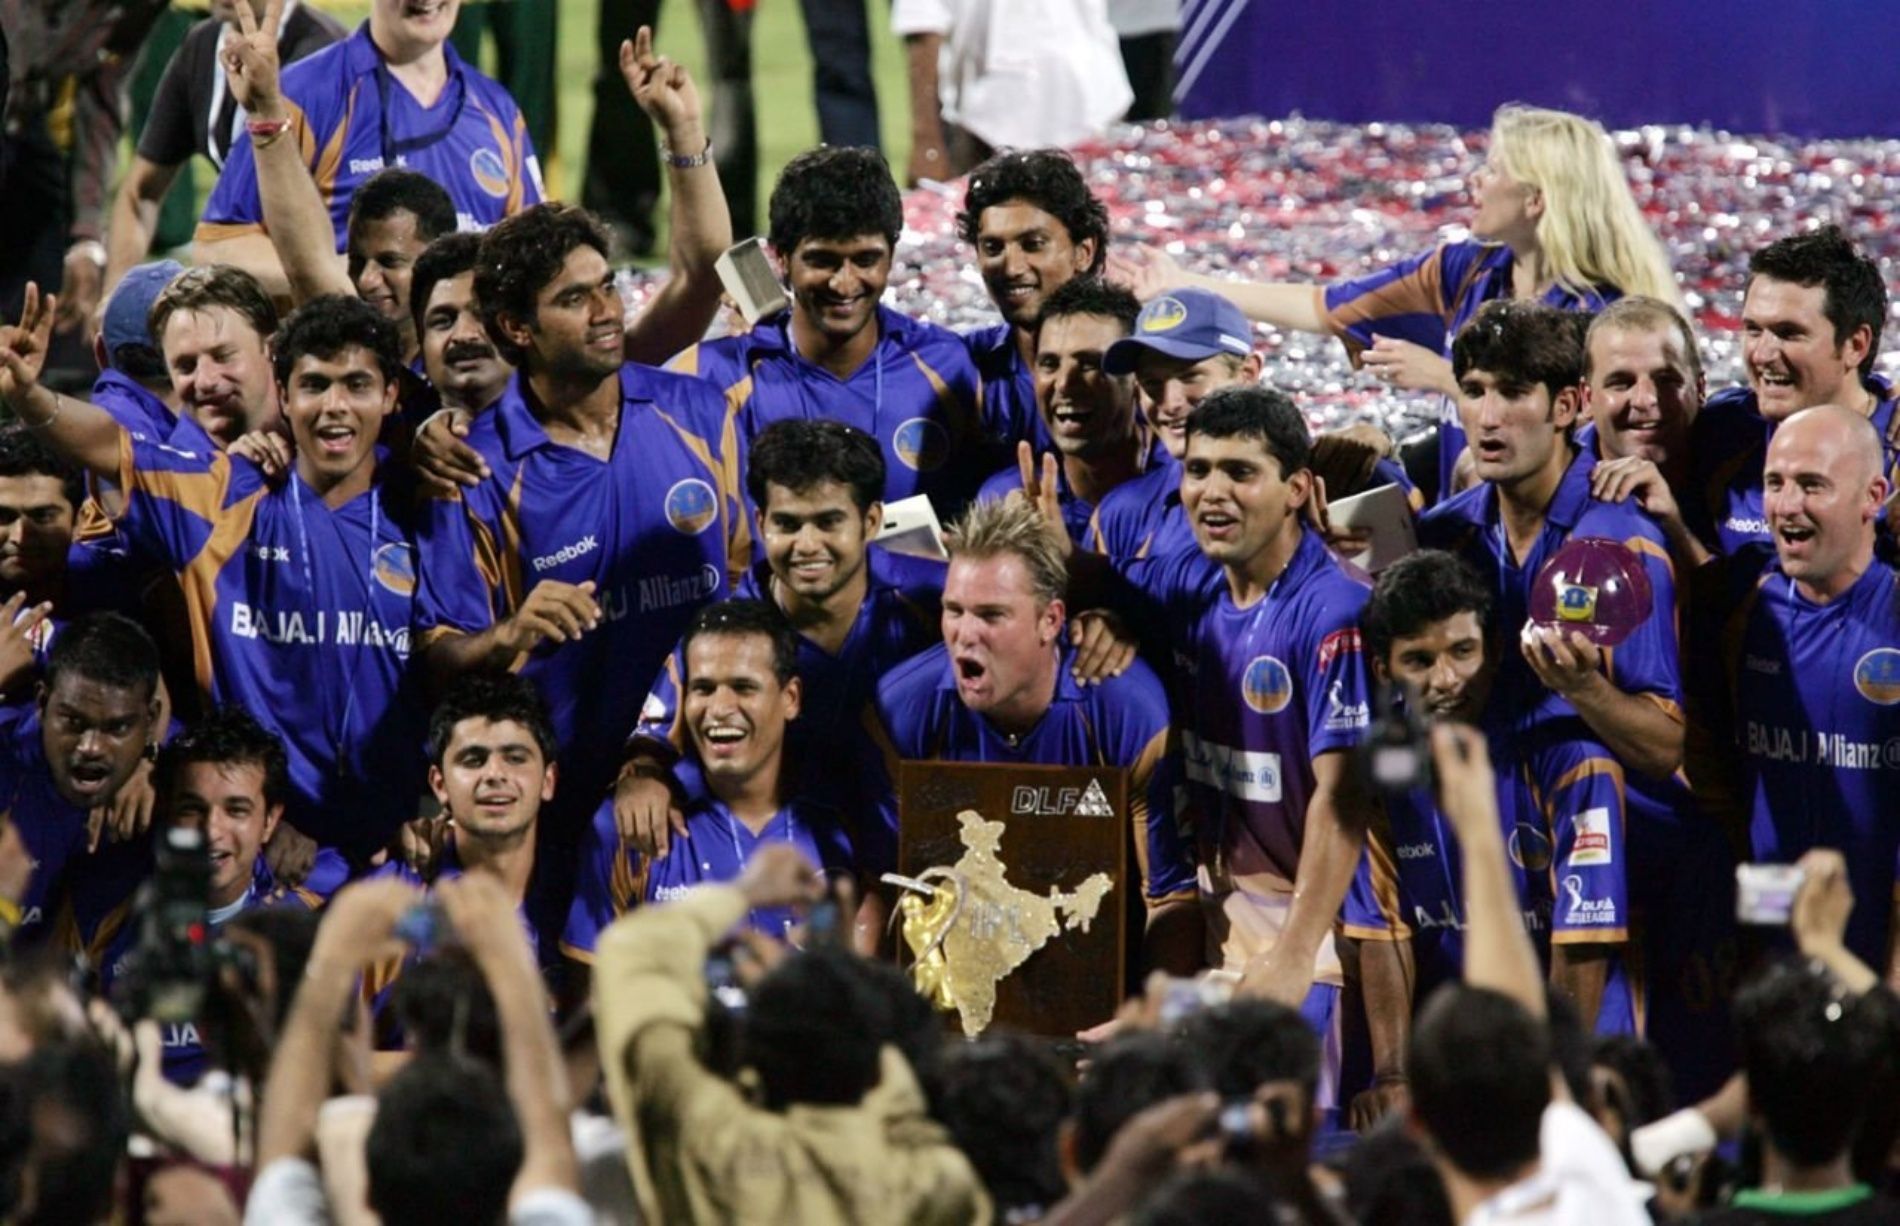 The late Shane Warne guided RR to victory in the inaugural IPL in 2008. Pic: Twitter